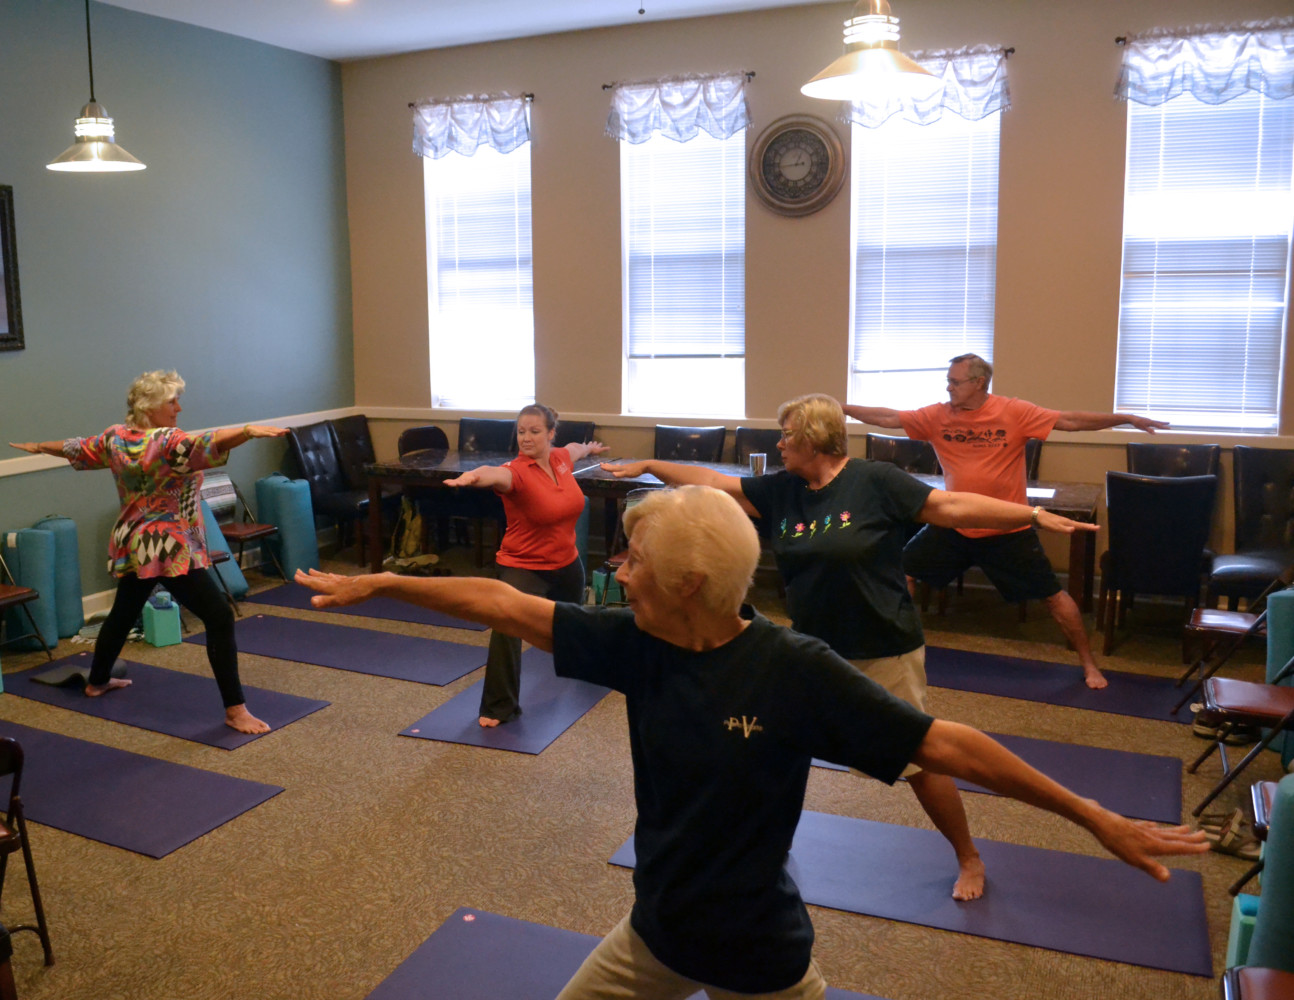 For 4-weeks, participants practice yoga as part of the fall prevention program offered by Clemson.